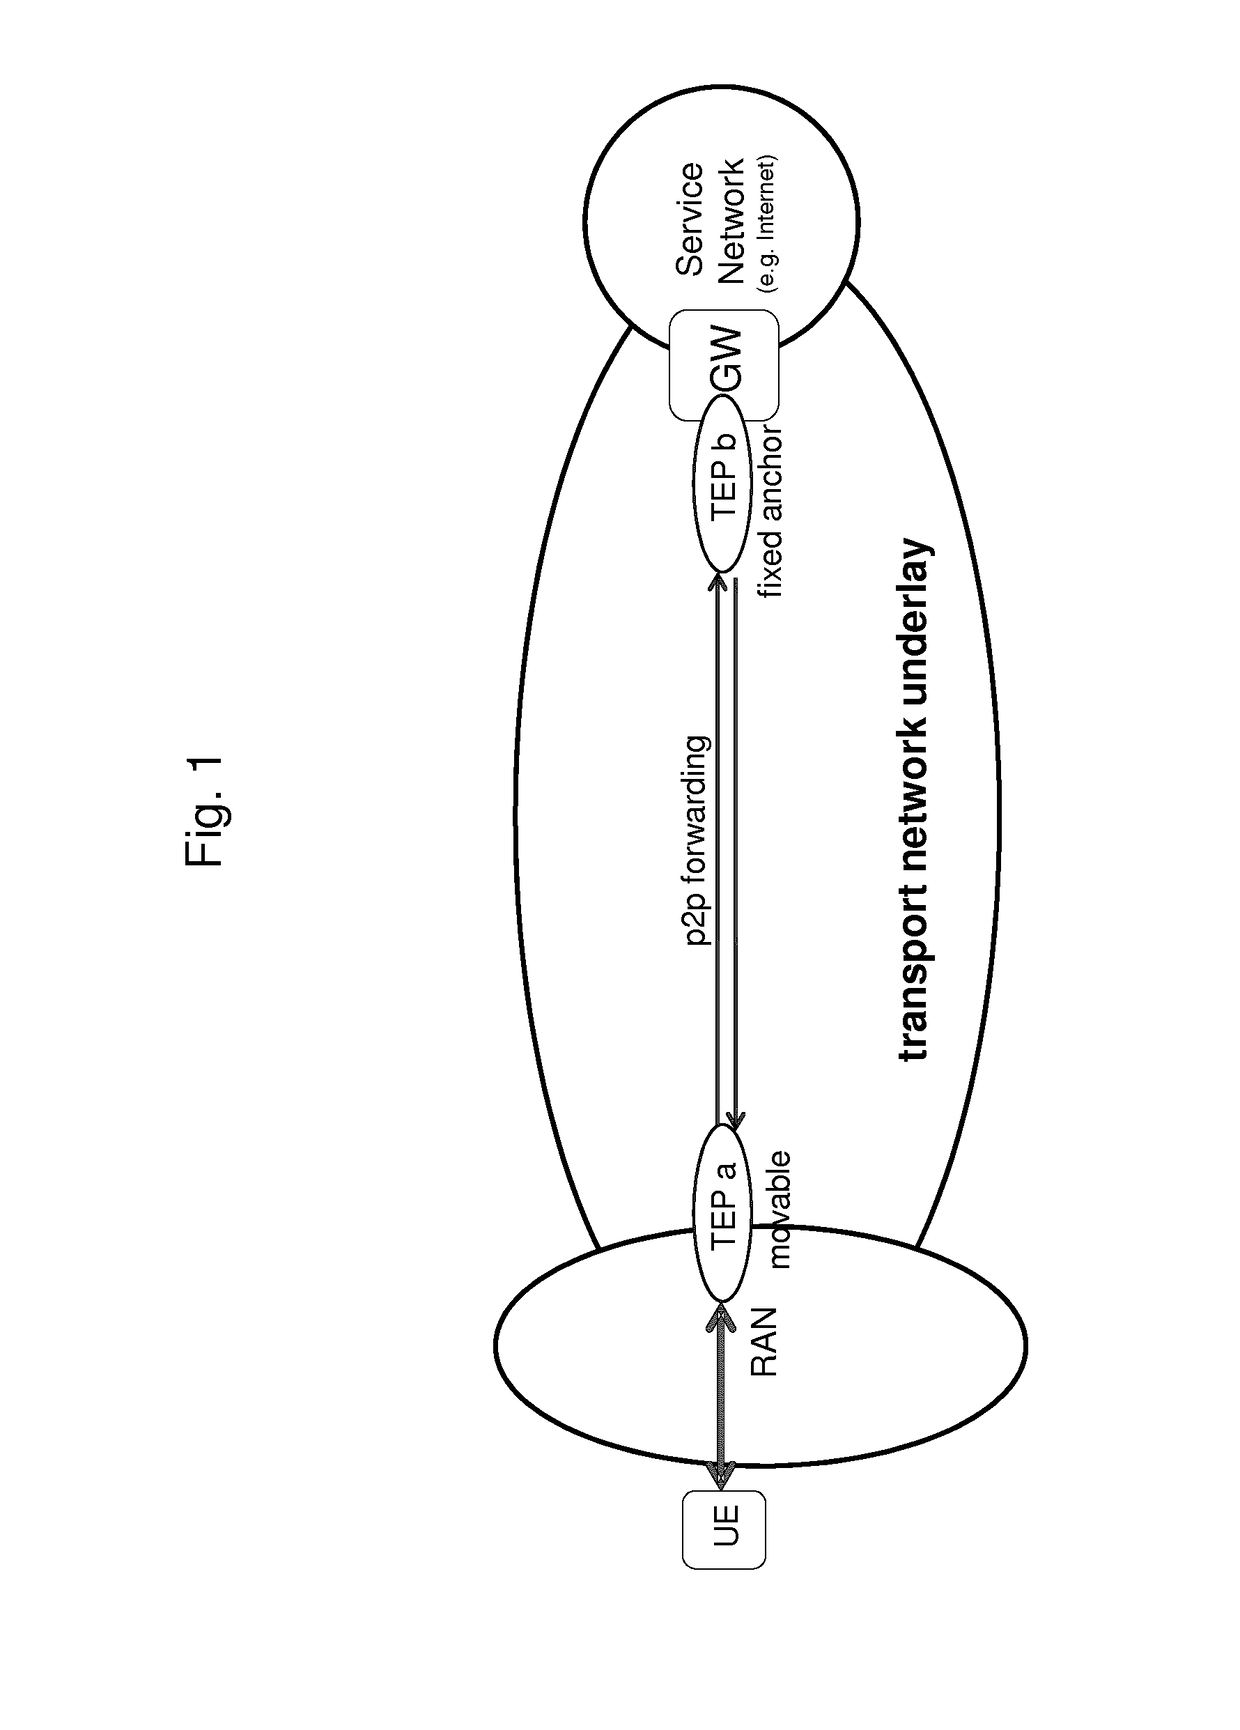 Integrated services processing for mobile networks